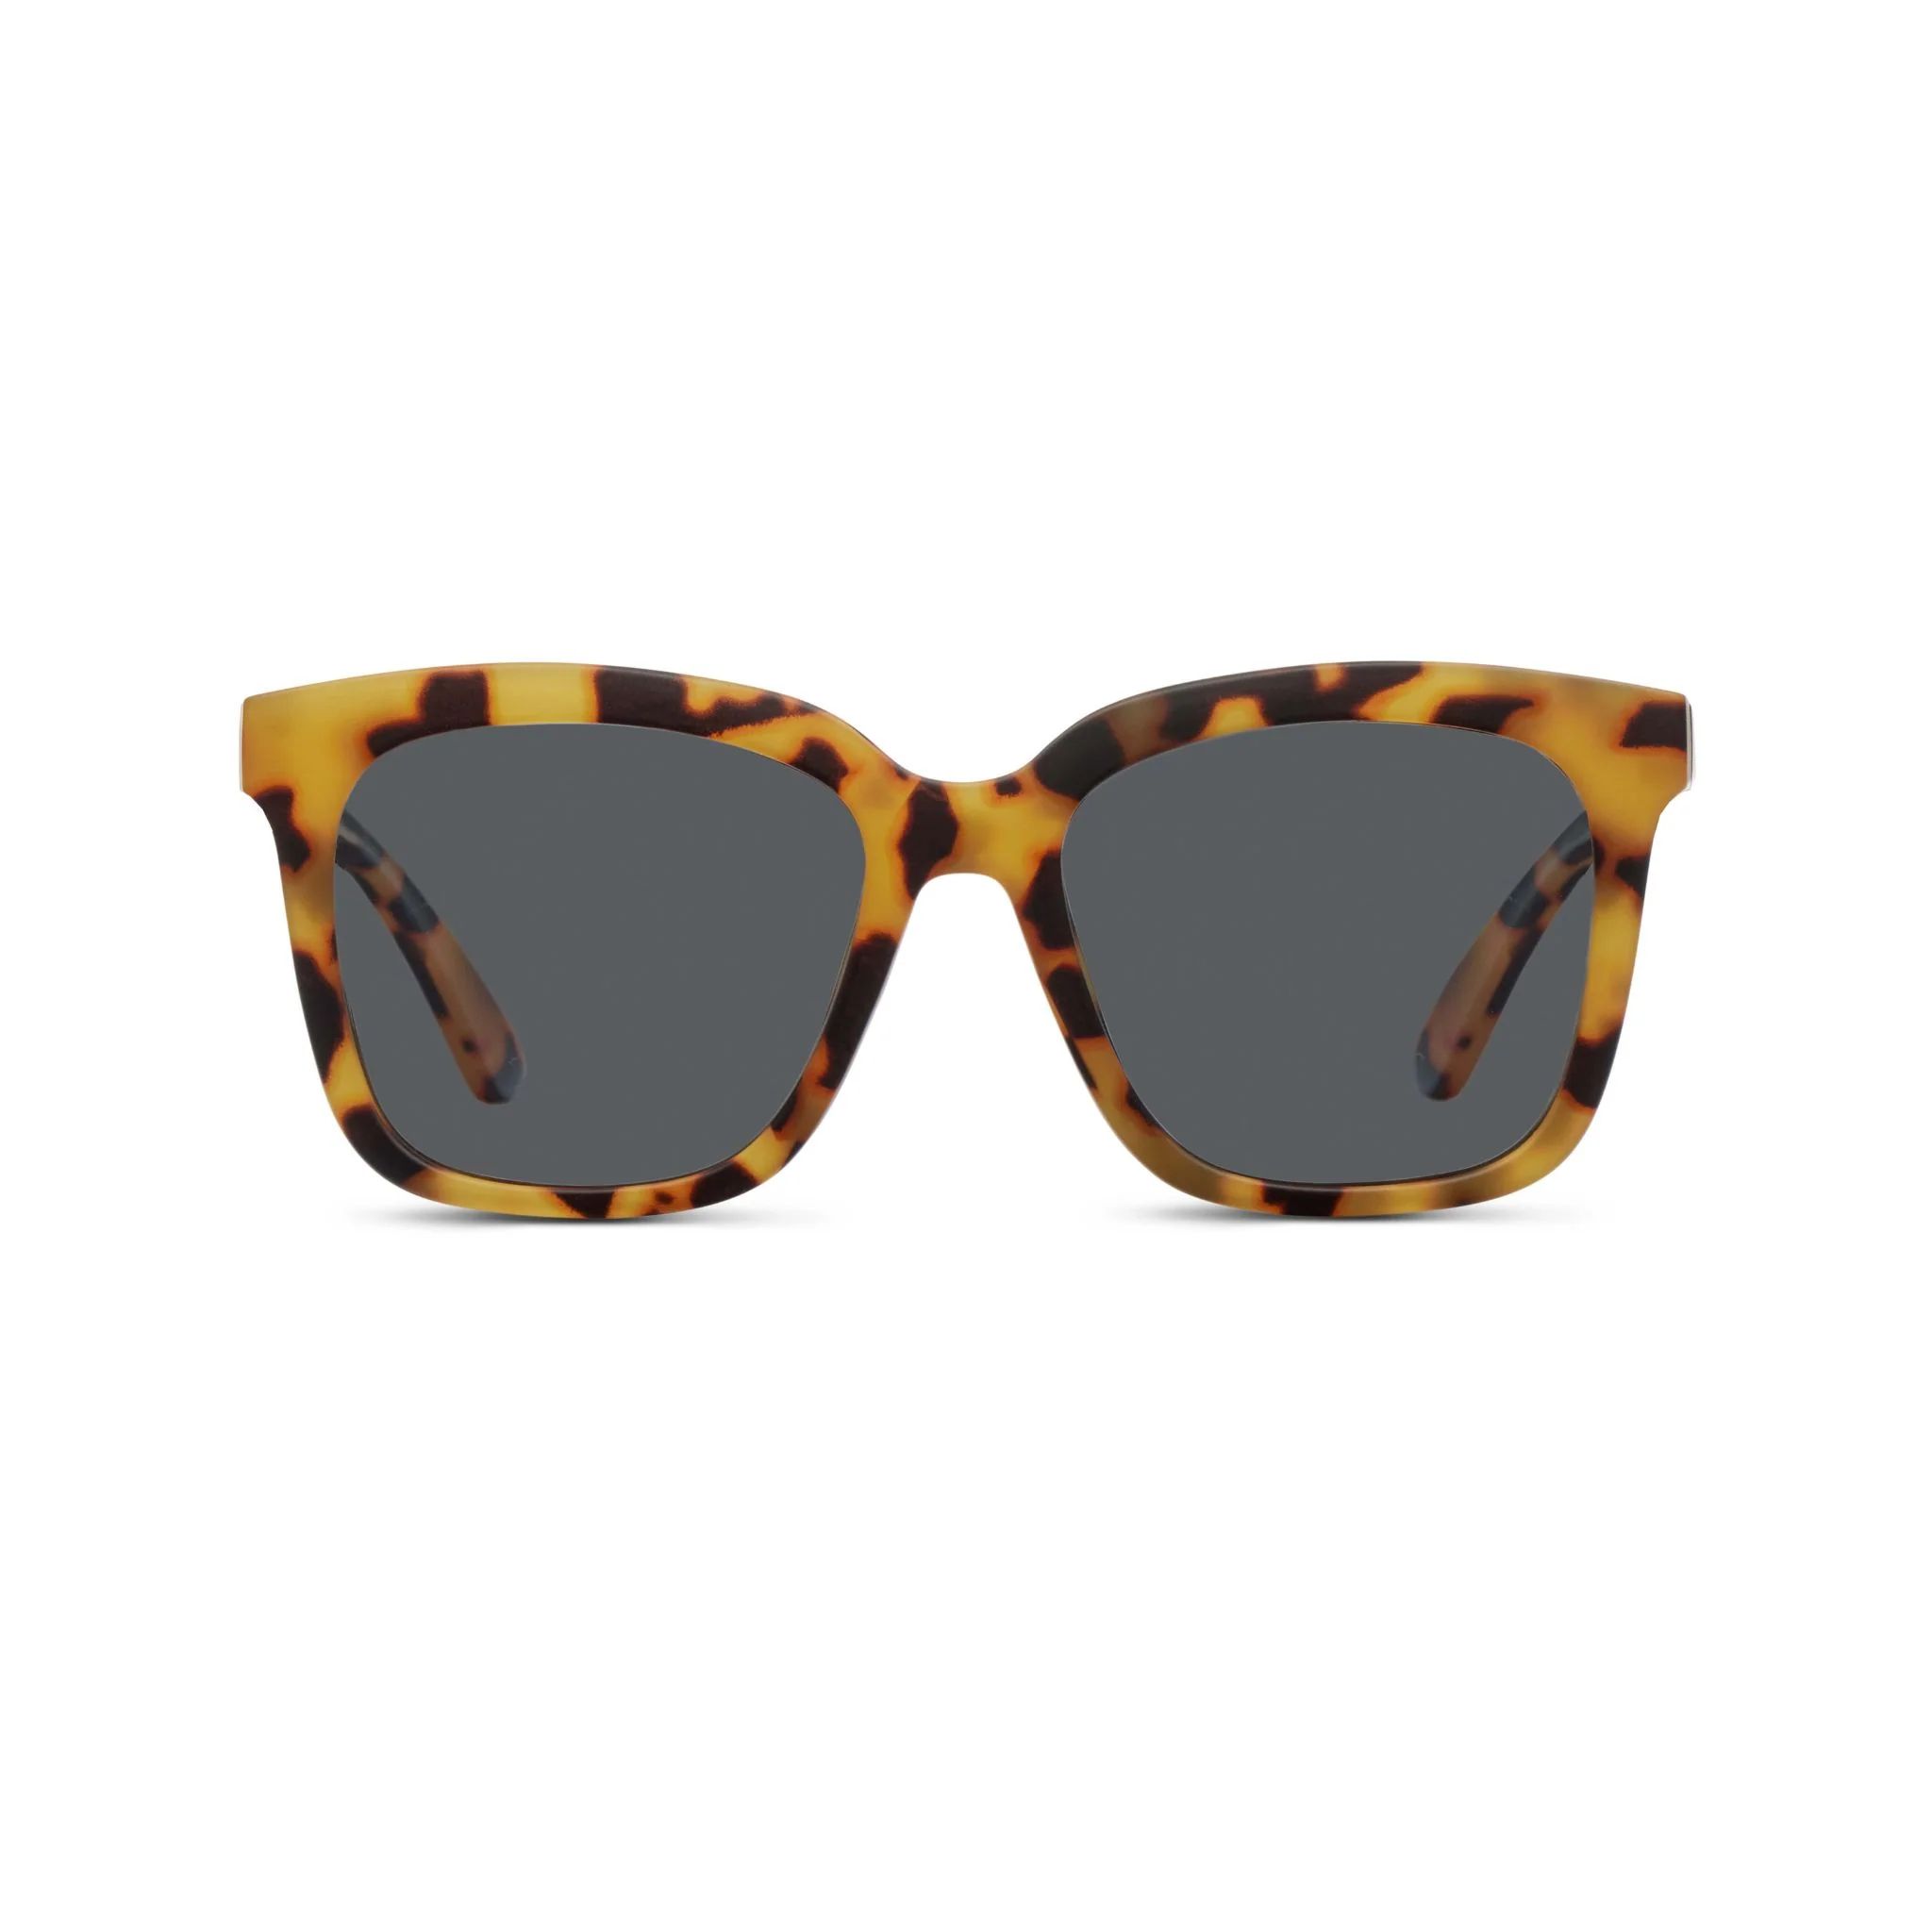 First Class (Sunglasses) - Tokyo Tortoise / No Correction / None - Peepers by PeeperSpecs | PEEPERS